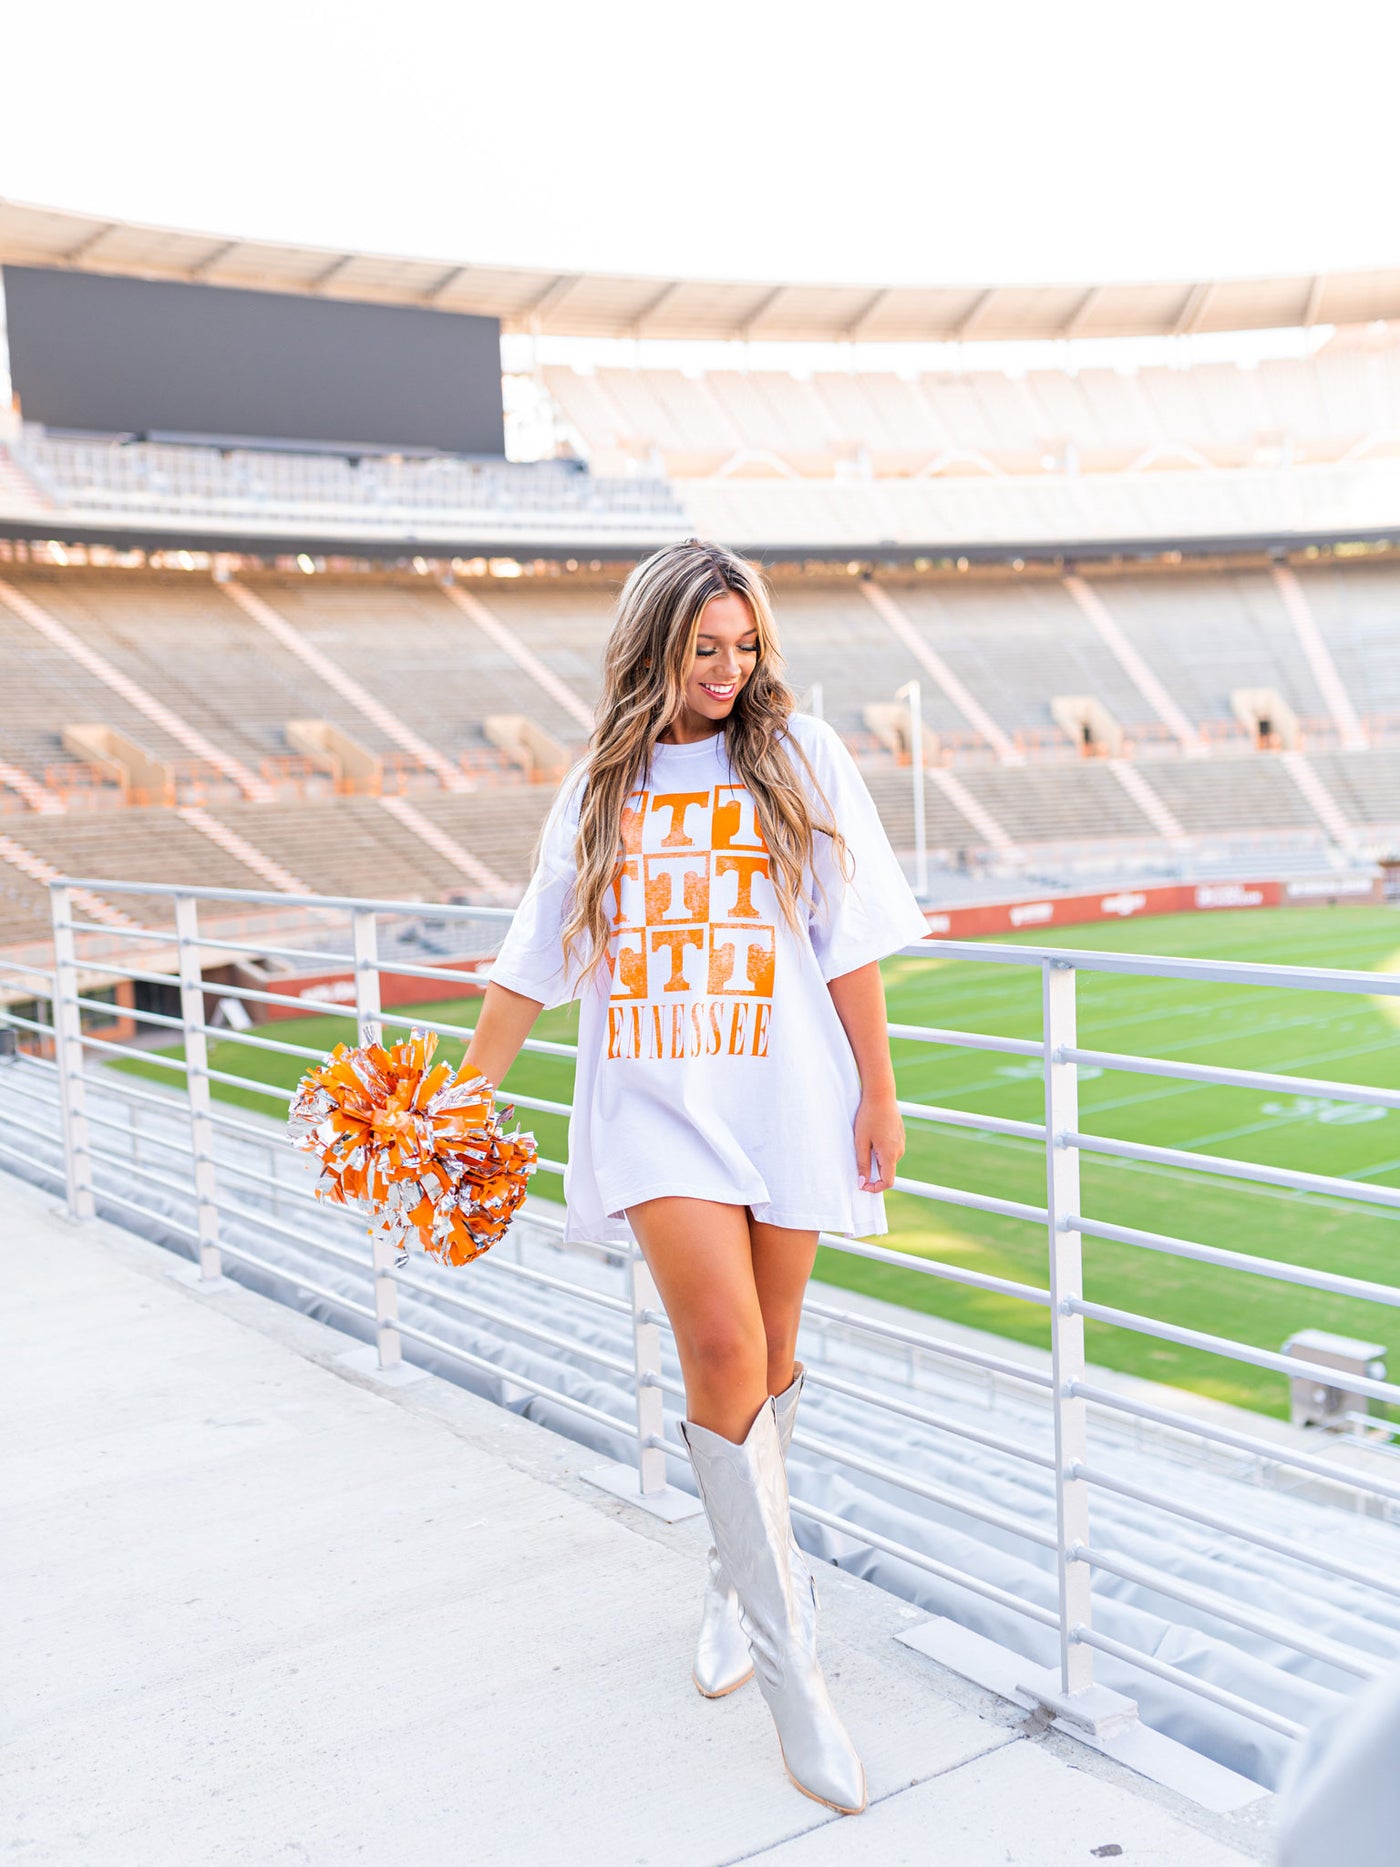 Tennessee Andy Oversized Tee